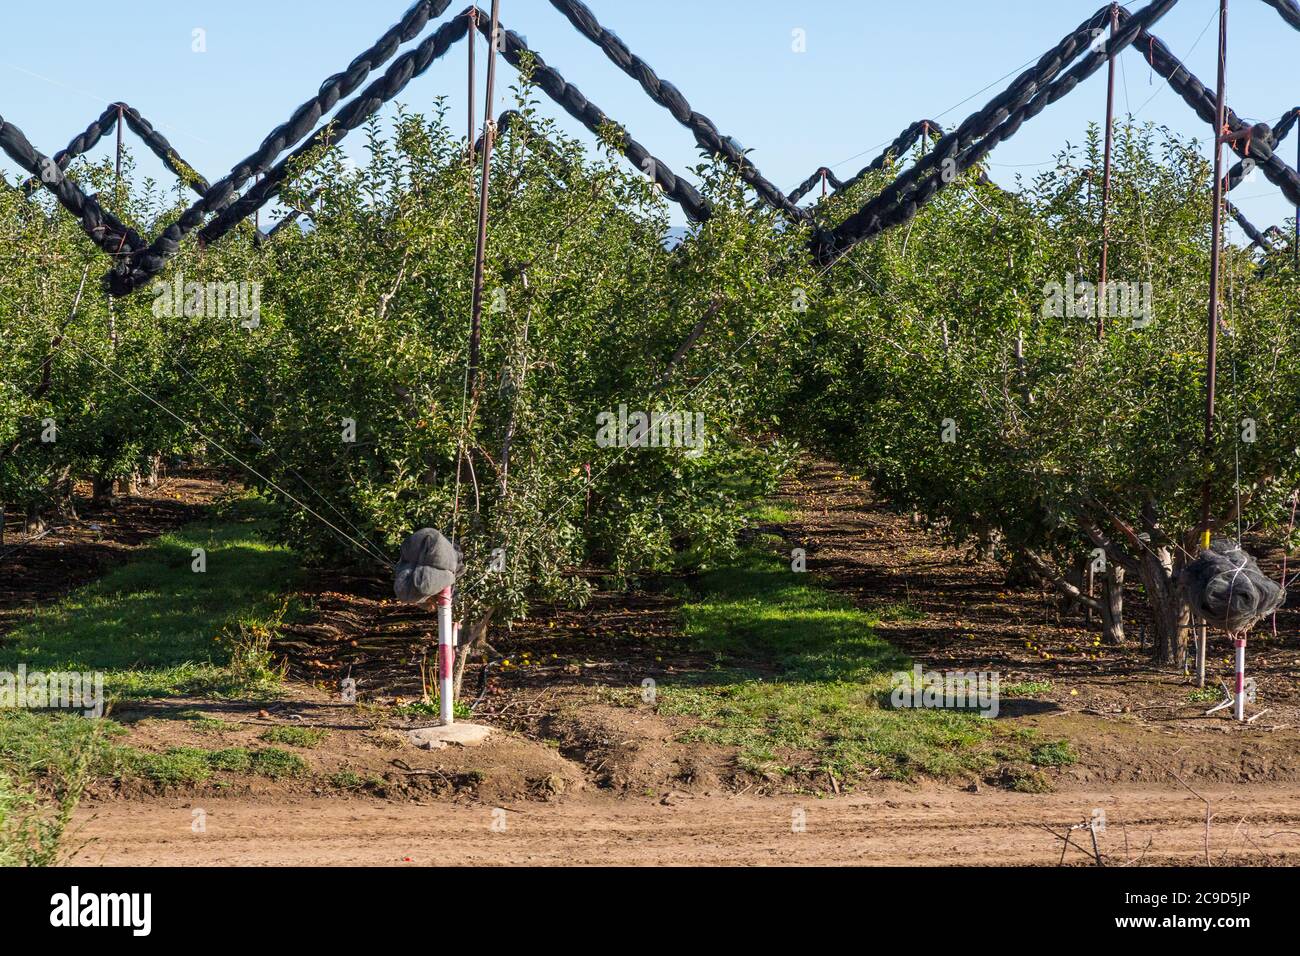 Chihuahua Agribusiness: Apple Orchard Seen from El Chepe Train between Chihuahua and La Junta, Chihuahua State, Mexico. Stock Photo